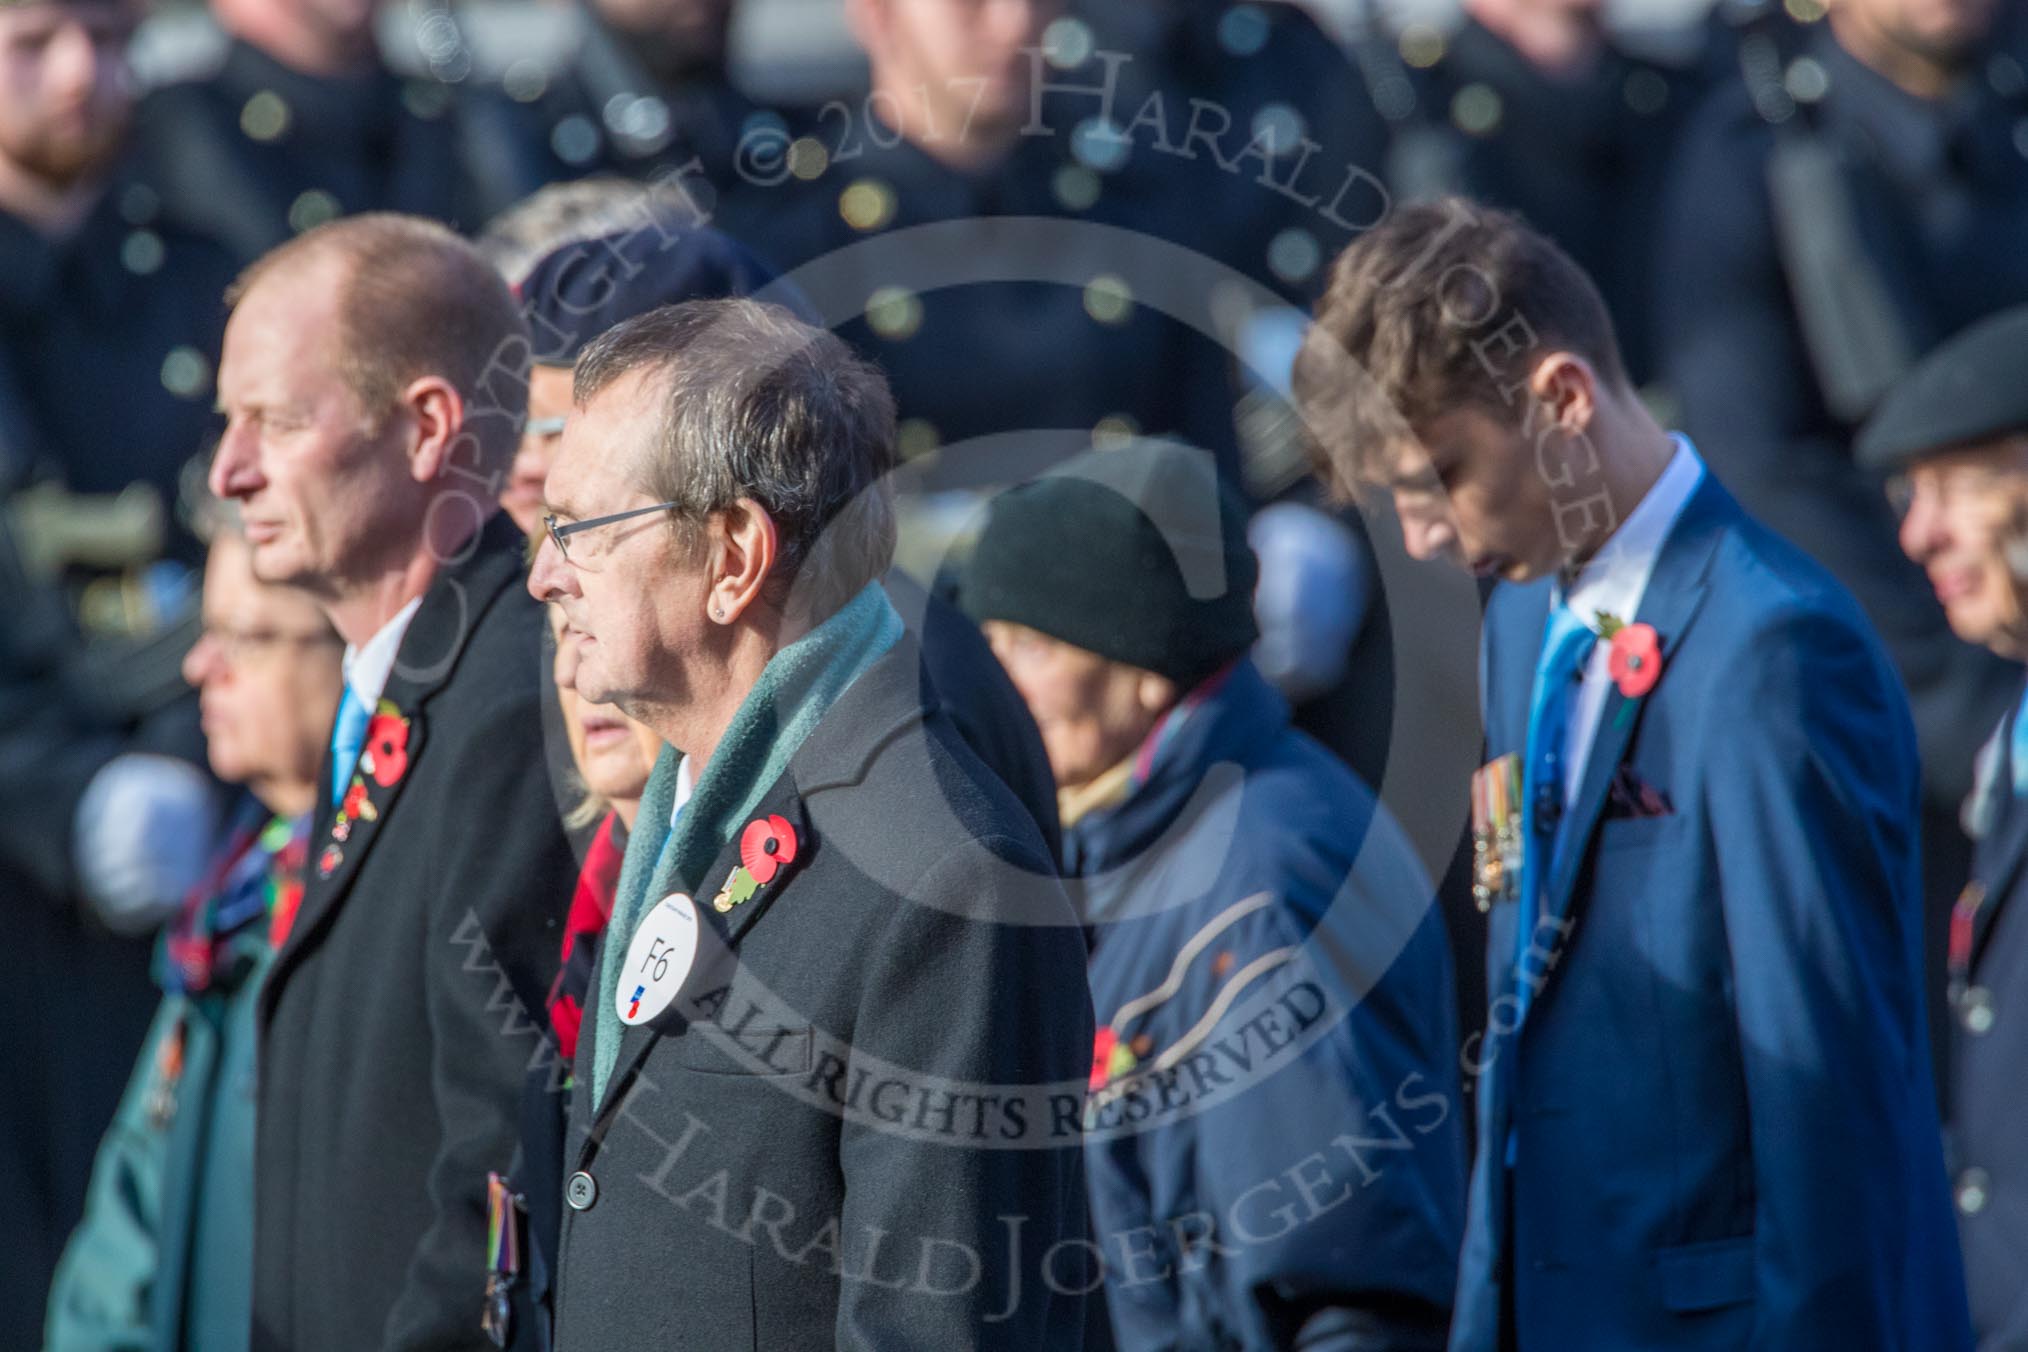 The Monte Cassino Society (Group F6, 29 members) during the Royal British Legion March Past on Remembrance Sunday at the Cenotaph, Whitehall, Westminster, London, 11 November 2018, 11:50.